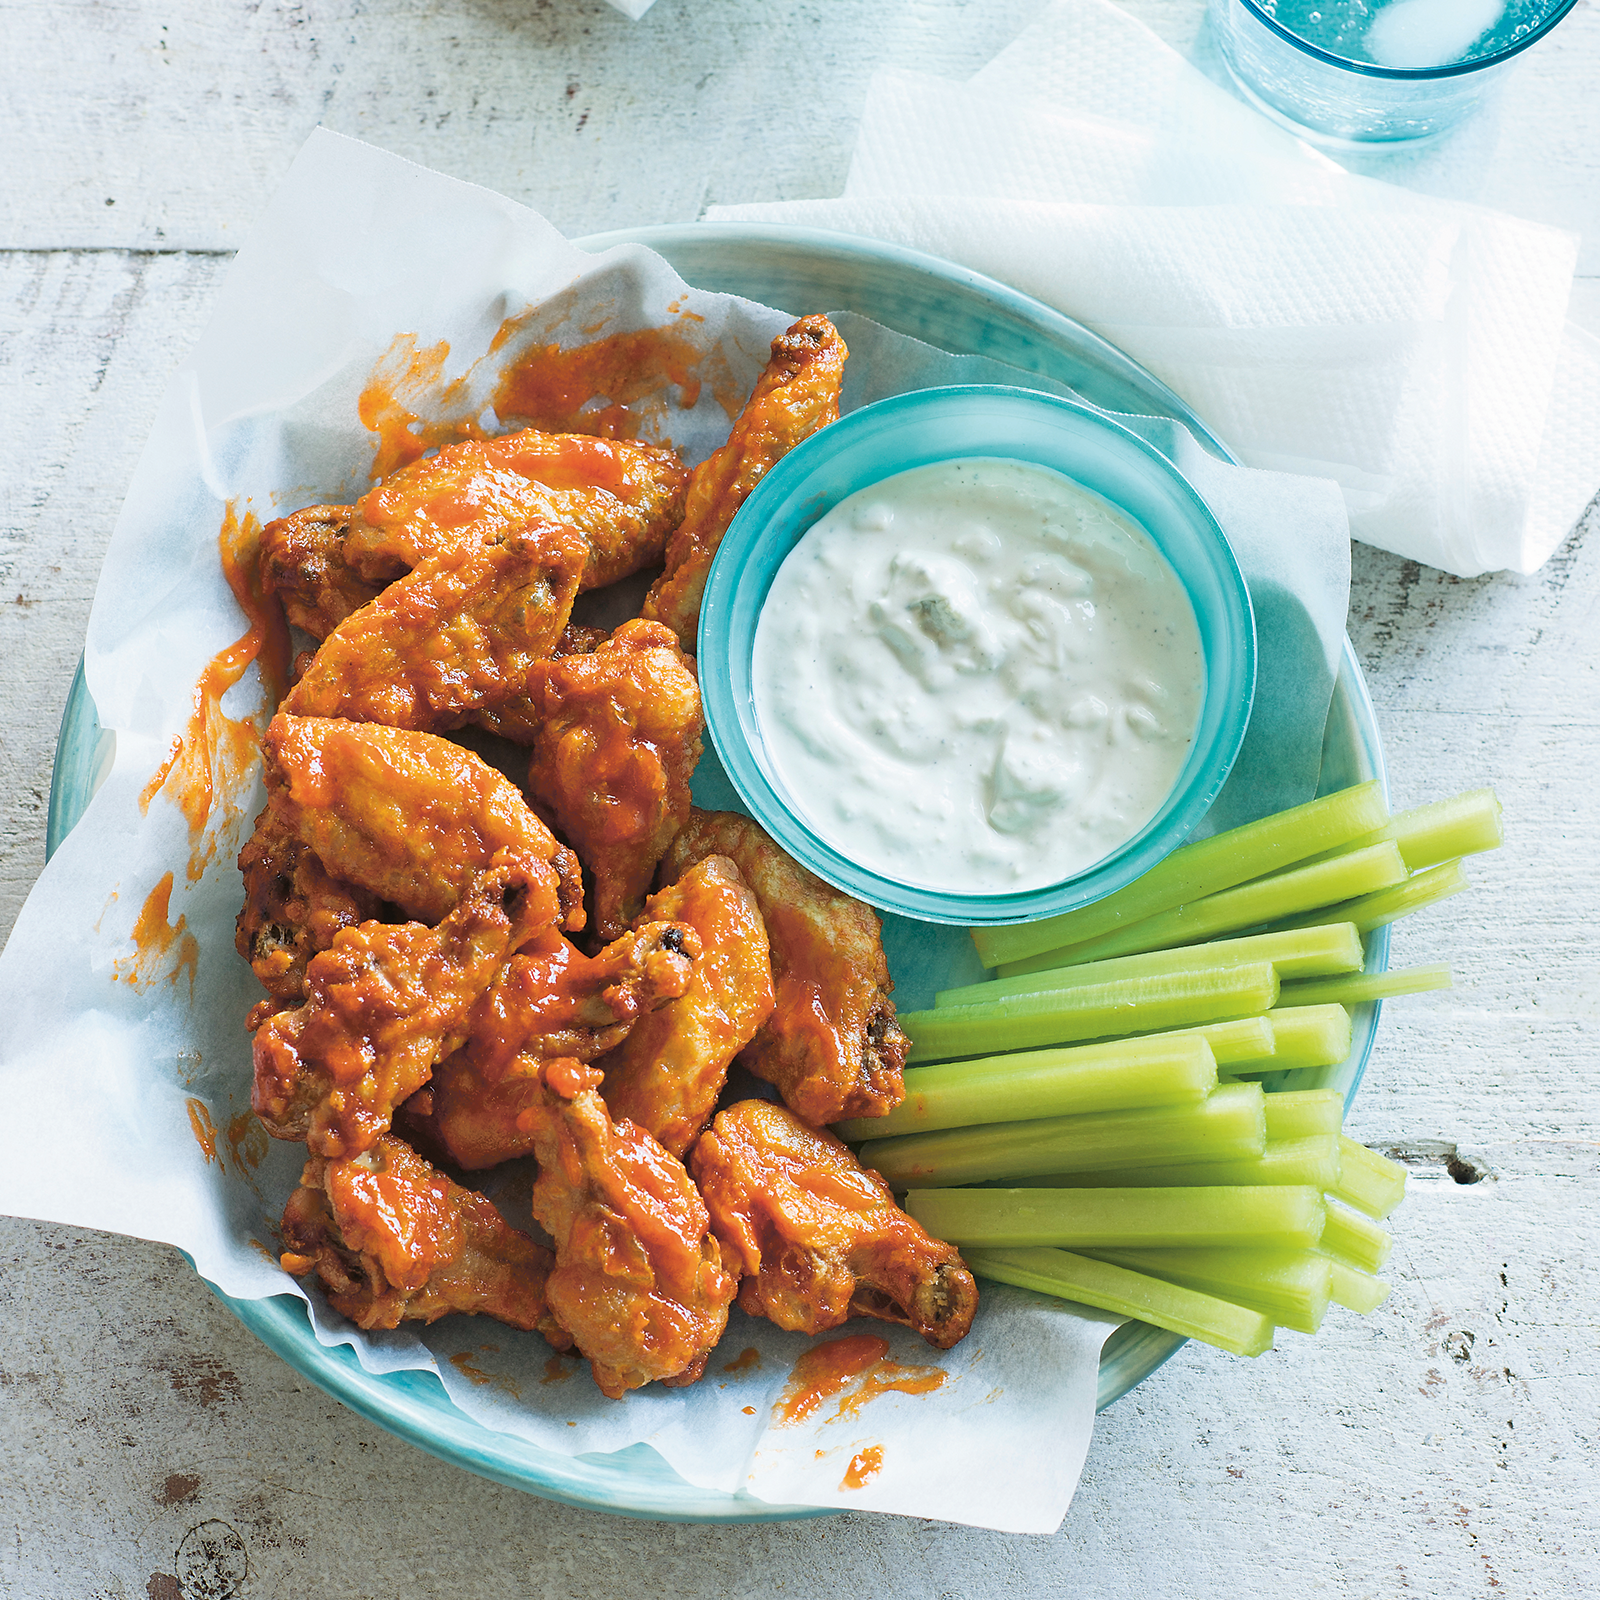 Gluten-free baked buffalo wings in a large bowl lined with greaseproof paper. A small dish with blue cheese dipping sauce is nestled next to the wings alongside celery sticks.